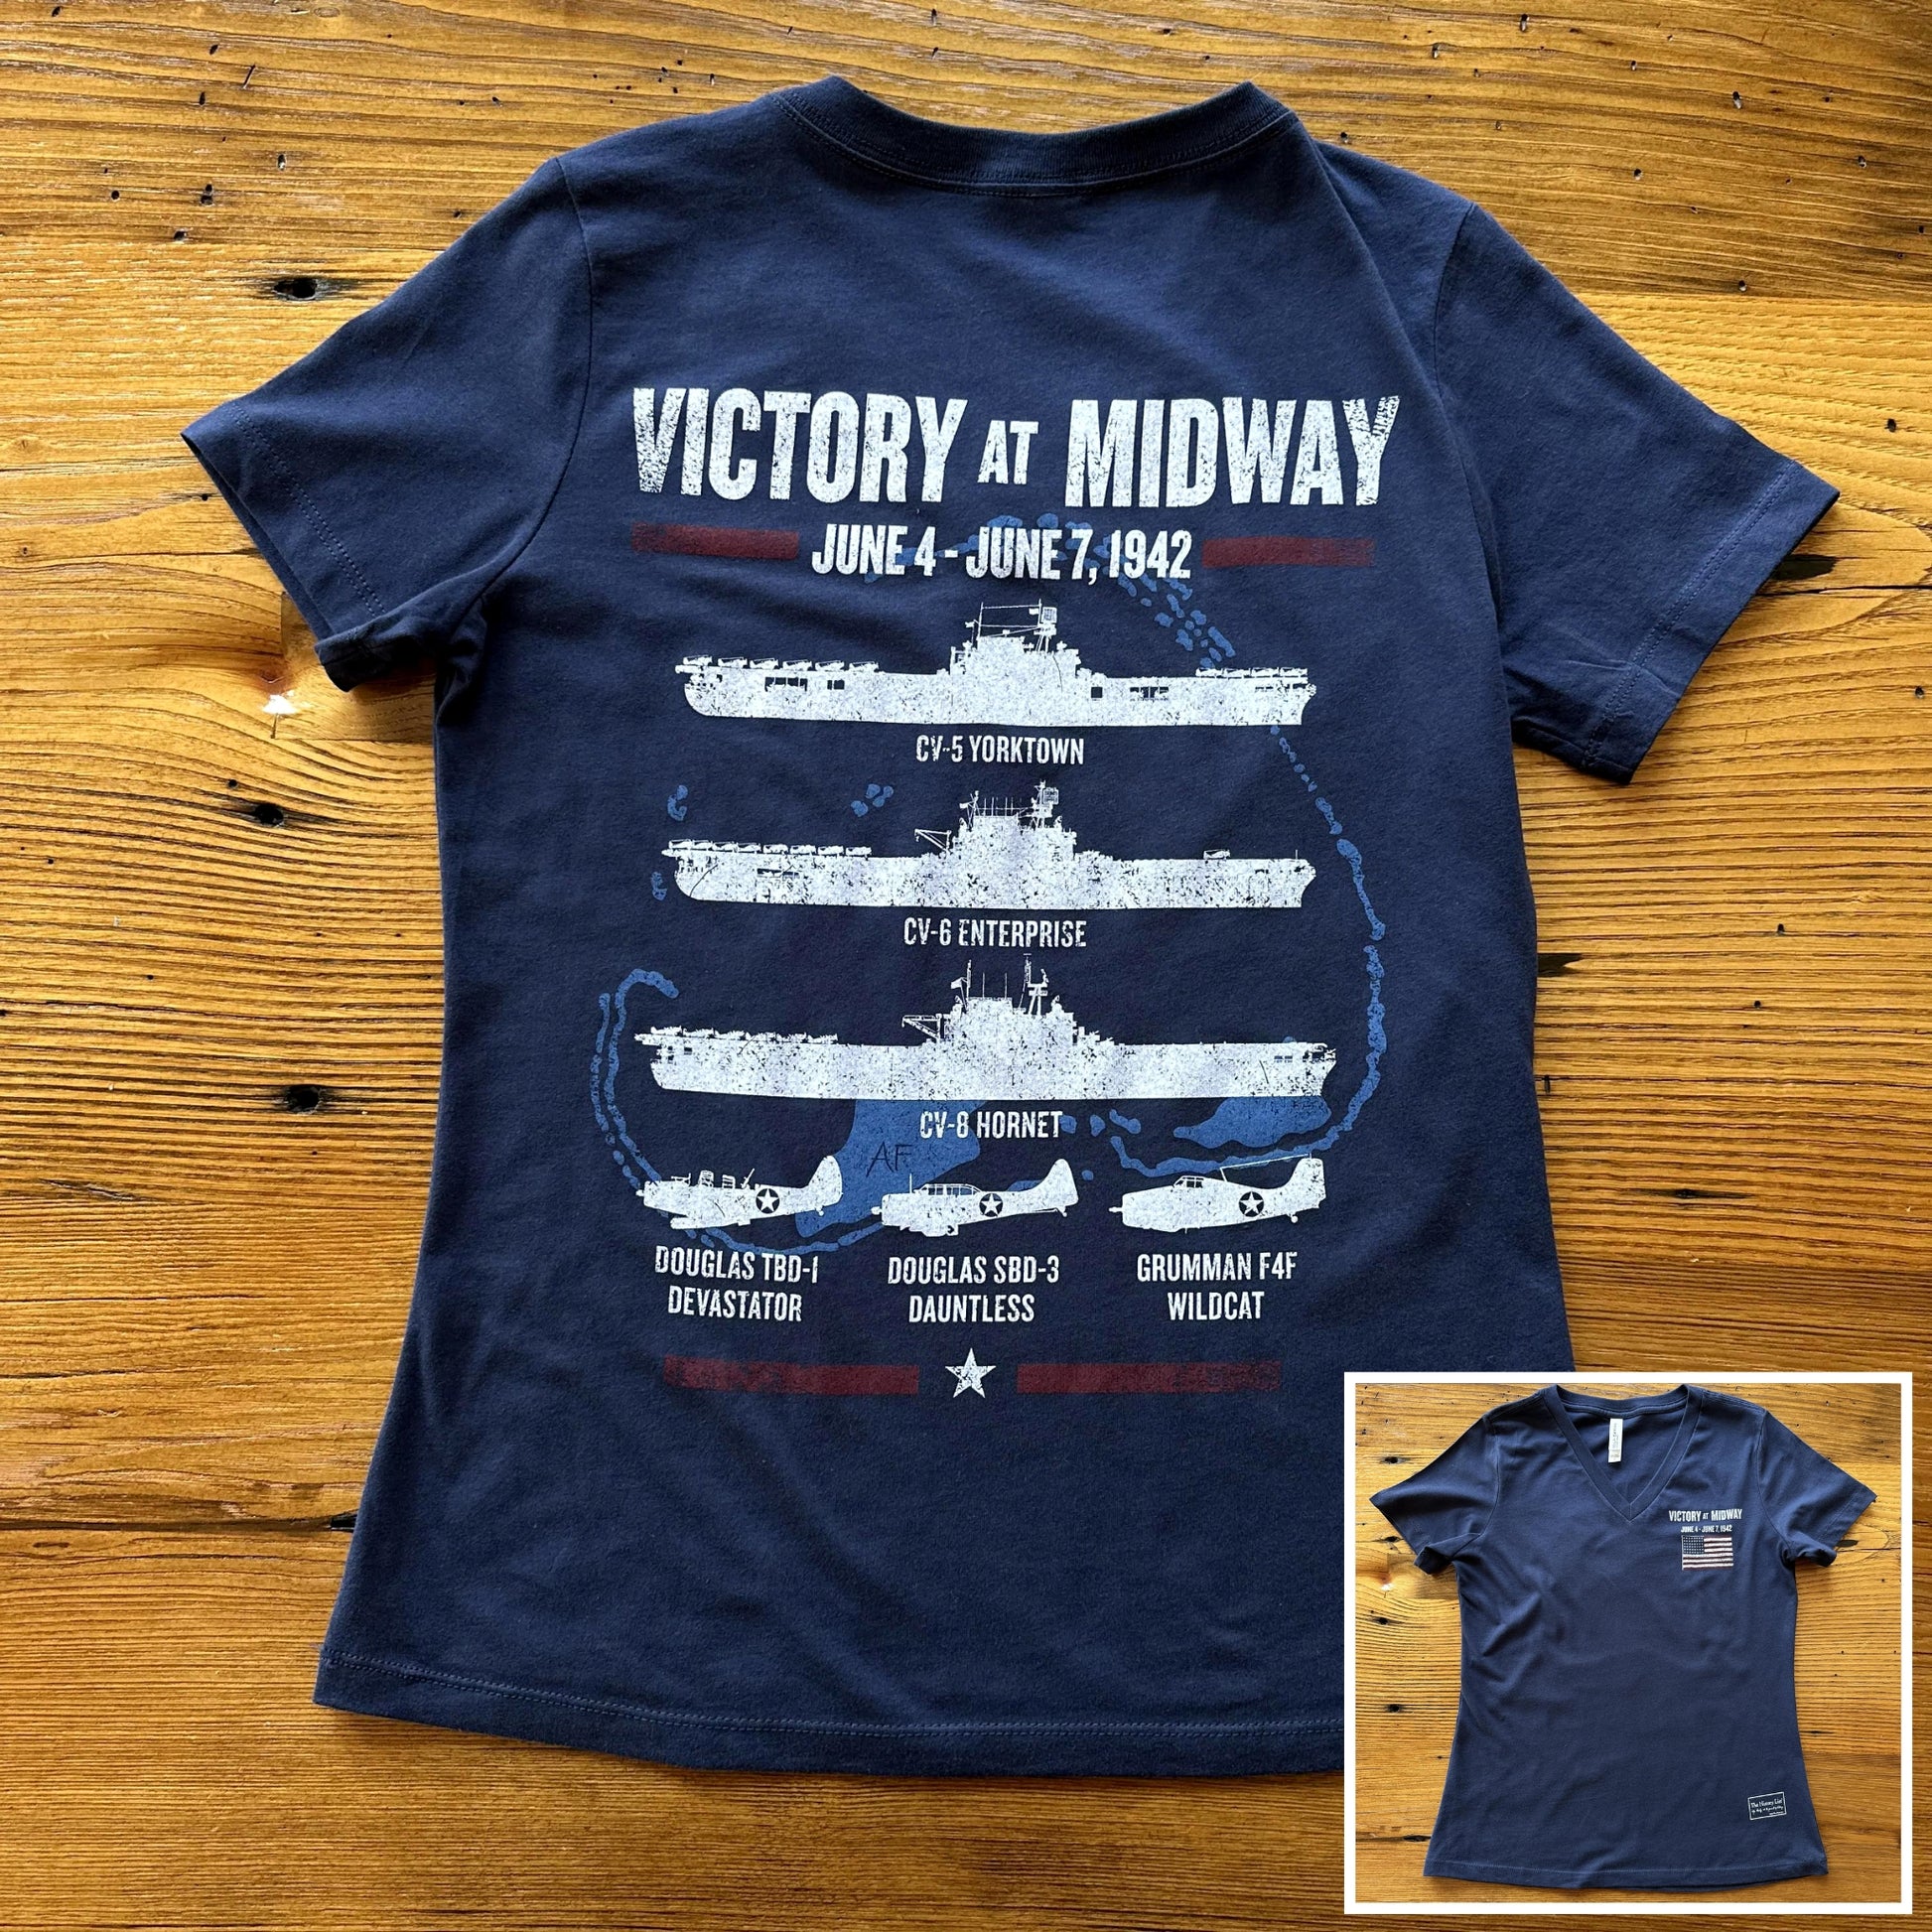 "Victory at Midway" Women's v-neck shirt from The History List store